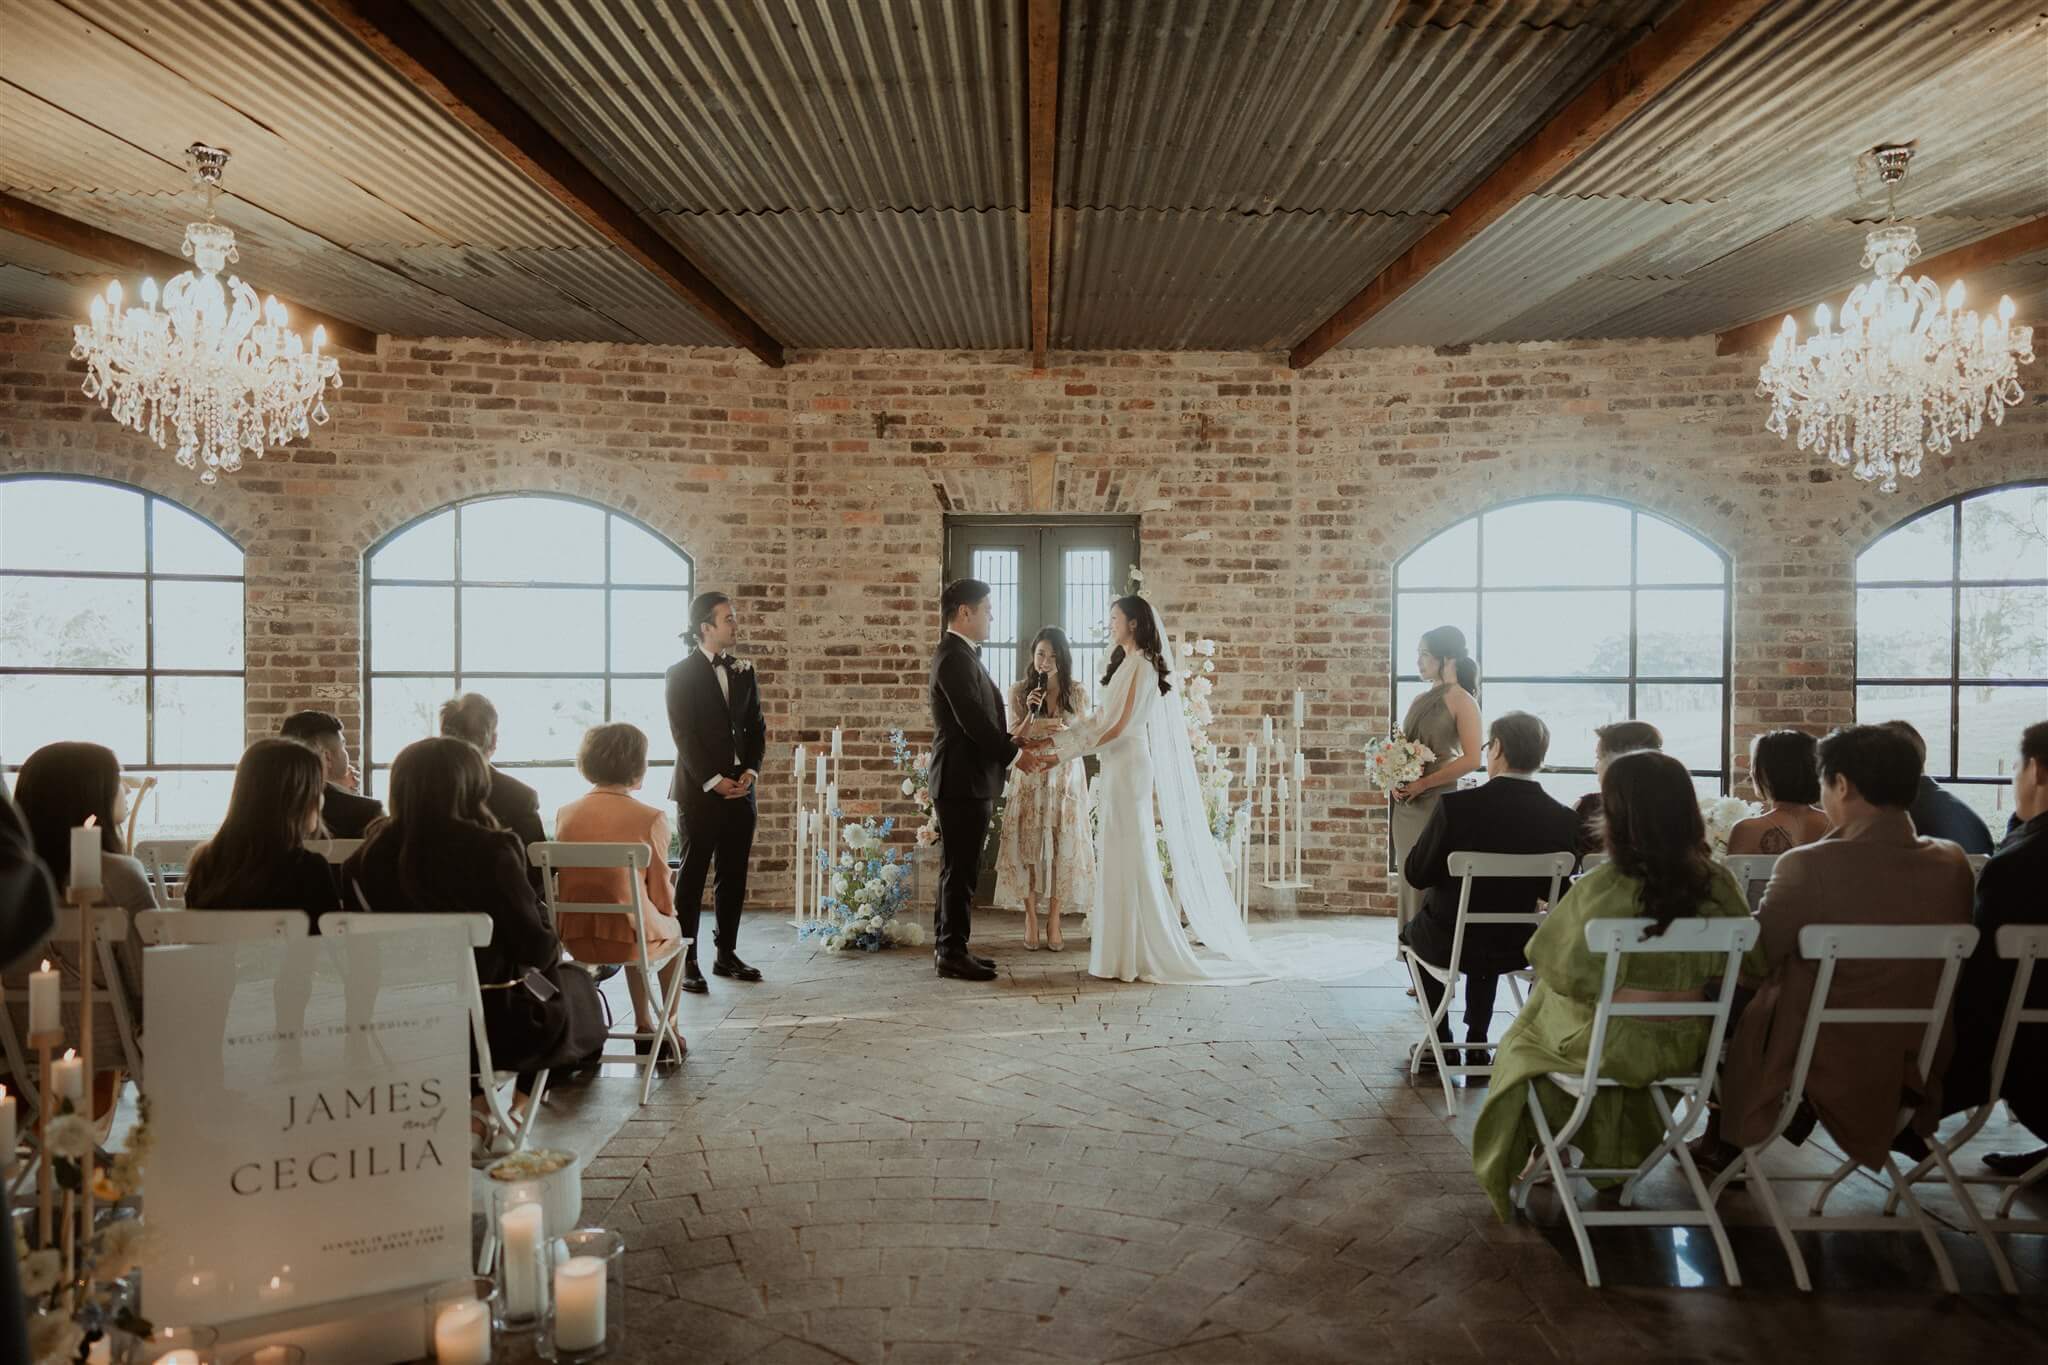 A serene and elegant indoor wedding ceremony in a rustic venue with exposed brick walls and a high-beamed ceiling, as a couple stands at the altar with guests seated in rows, soft natural light streaming through arched windows